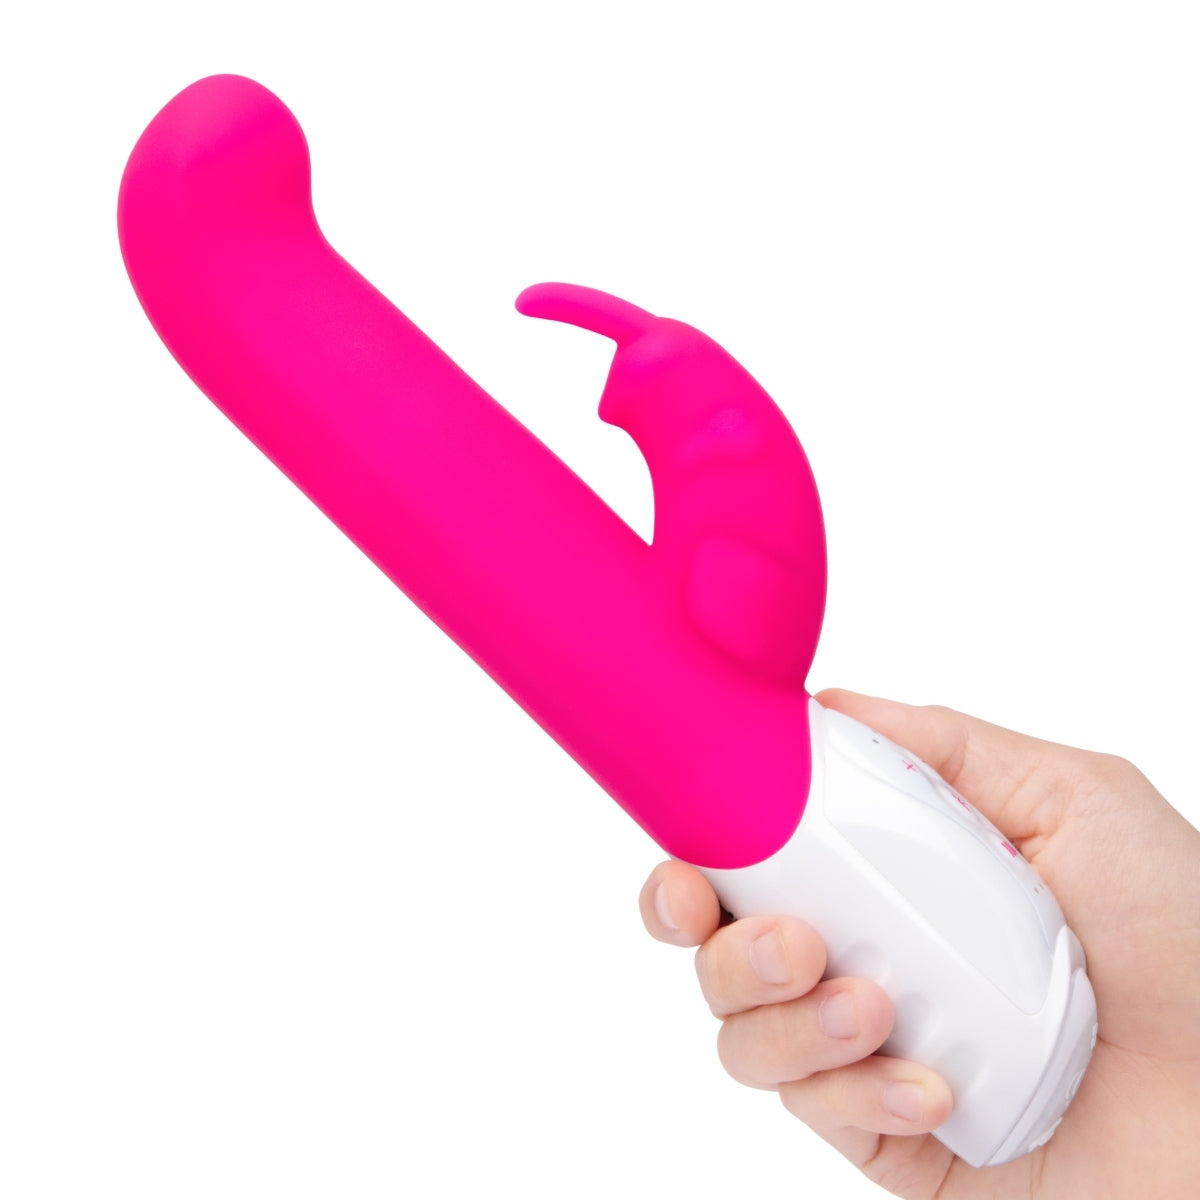 Rabbit Essentials Come Hither Rabbit Vibrator With Throbbing Shaft Hot Pink